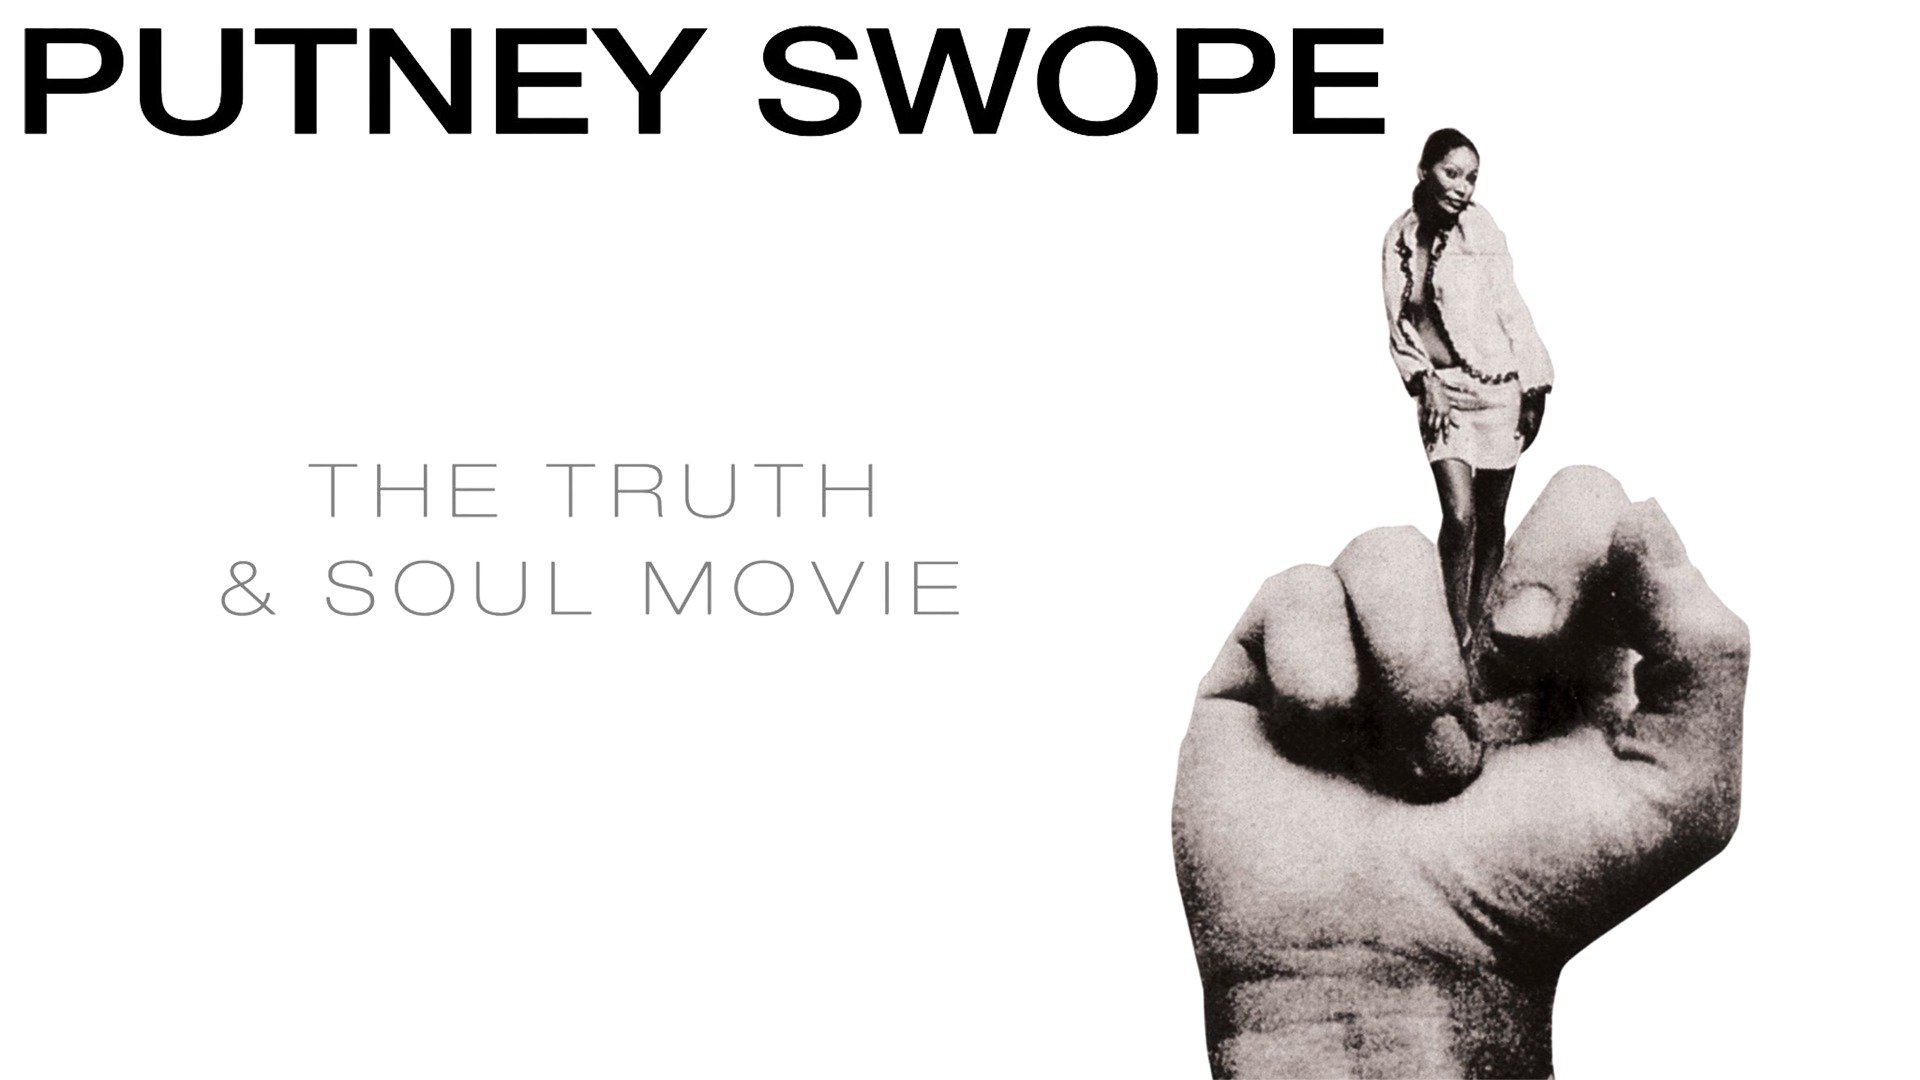 40-facts-about-the-movie-putney-swope